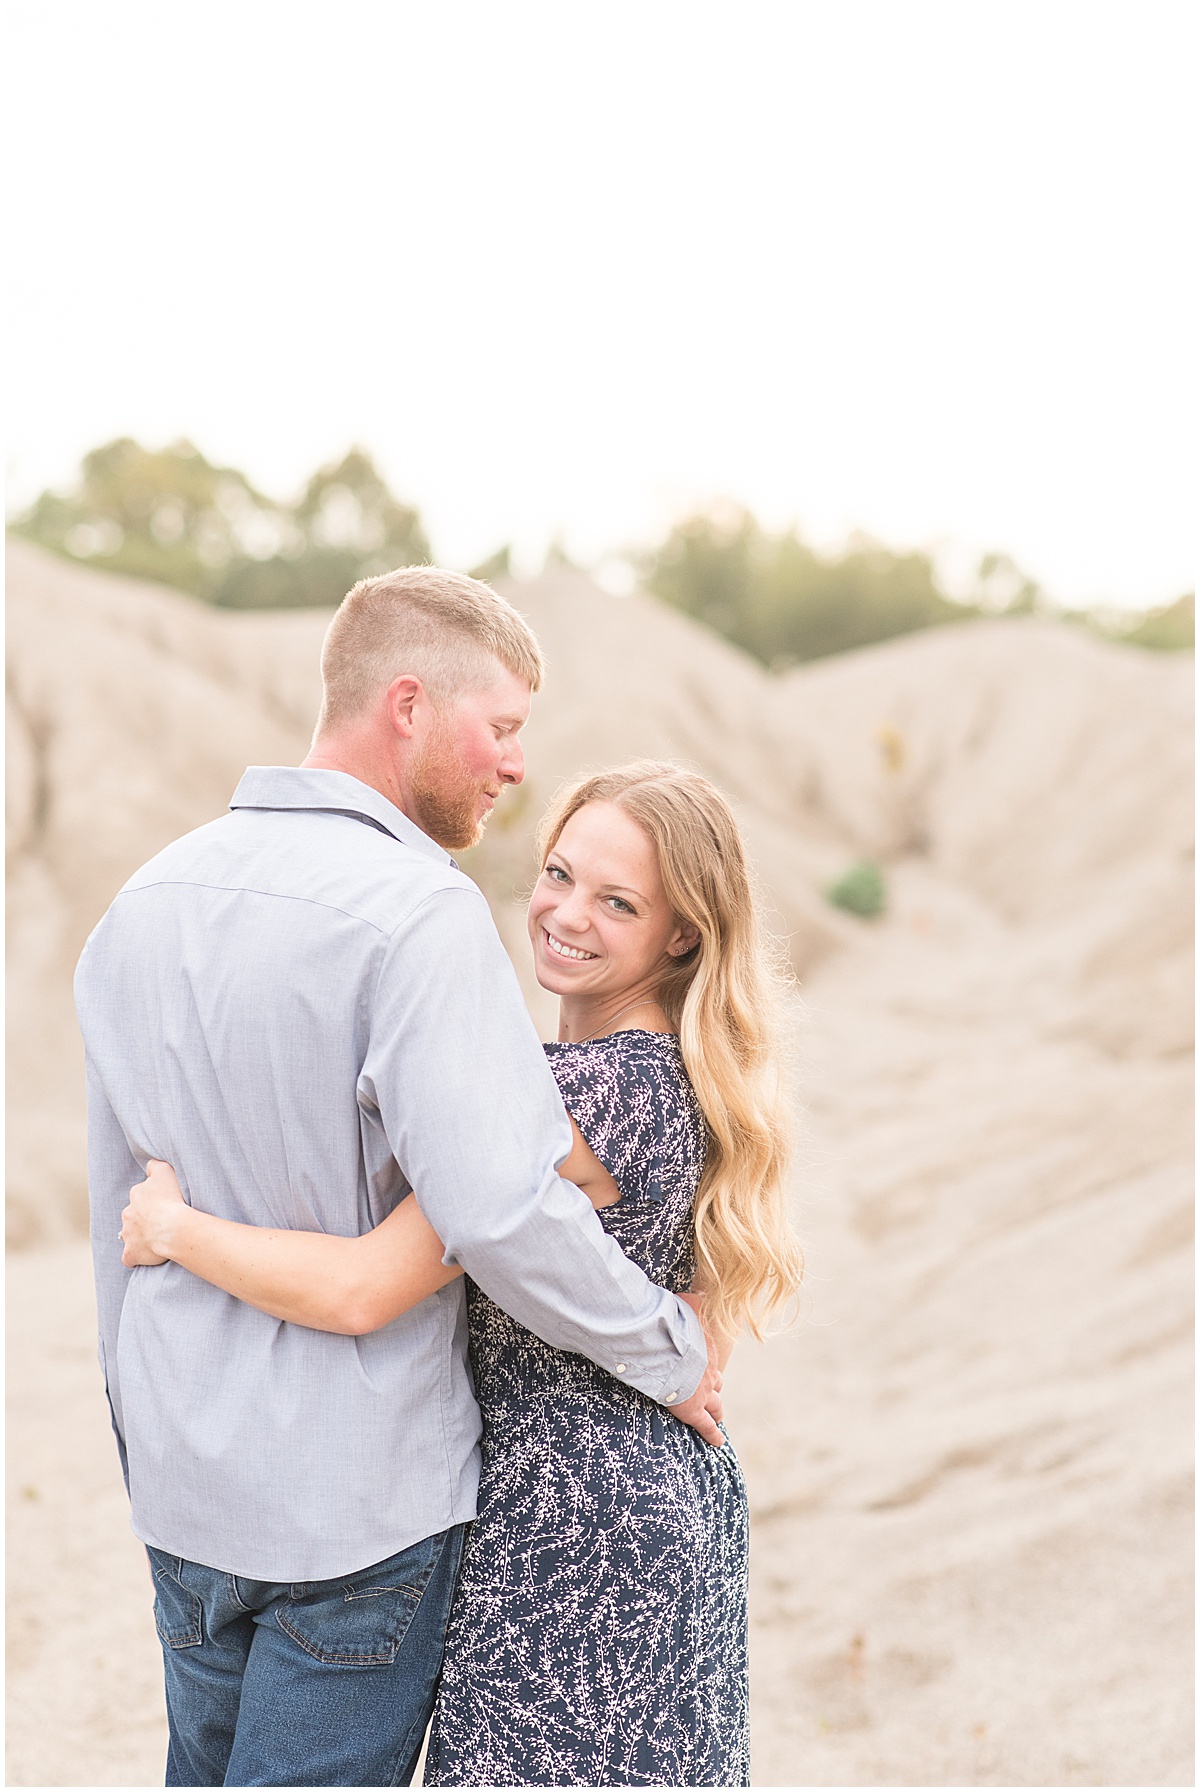 Engagement photos in Logansport, Indiana at a quarry